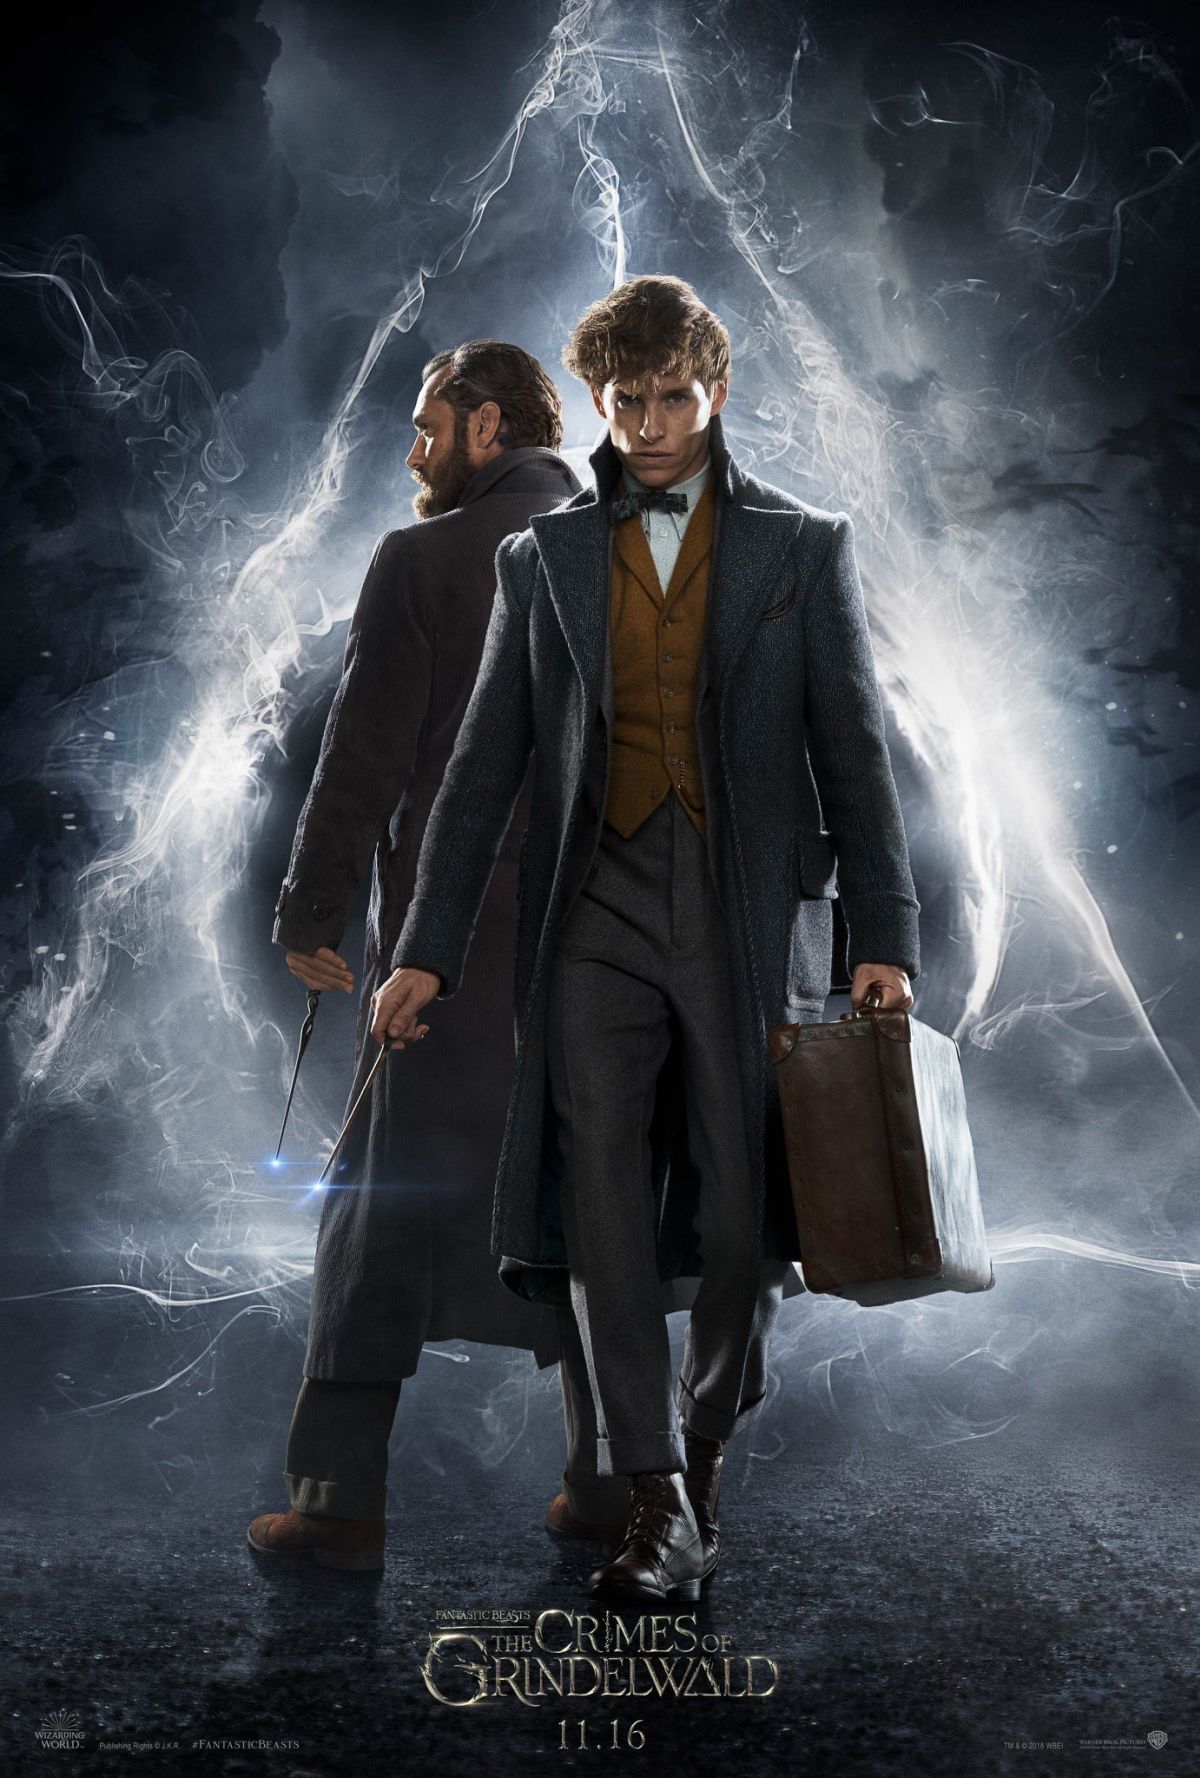 The Fantastic Beasts: The Crimes of Grindelwald Poster - Movienewz.com1200 x 1778